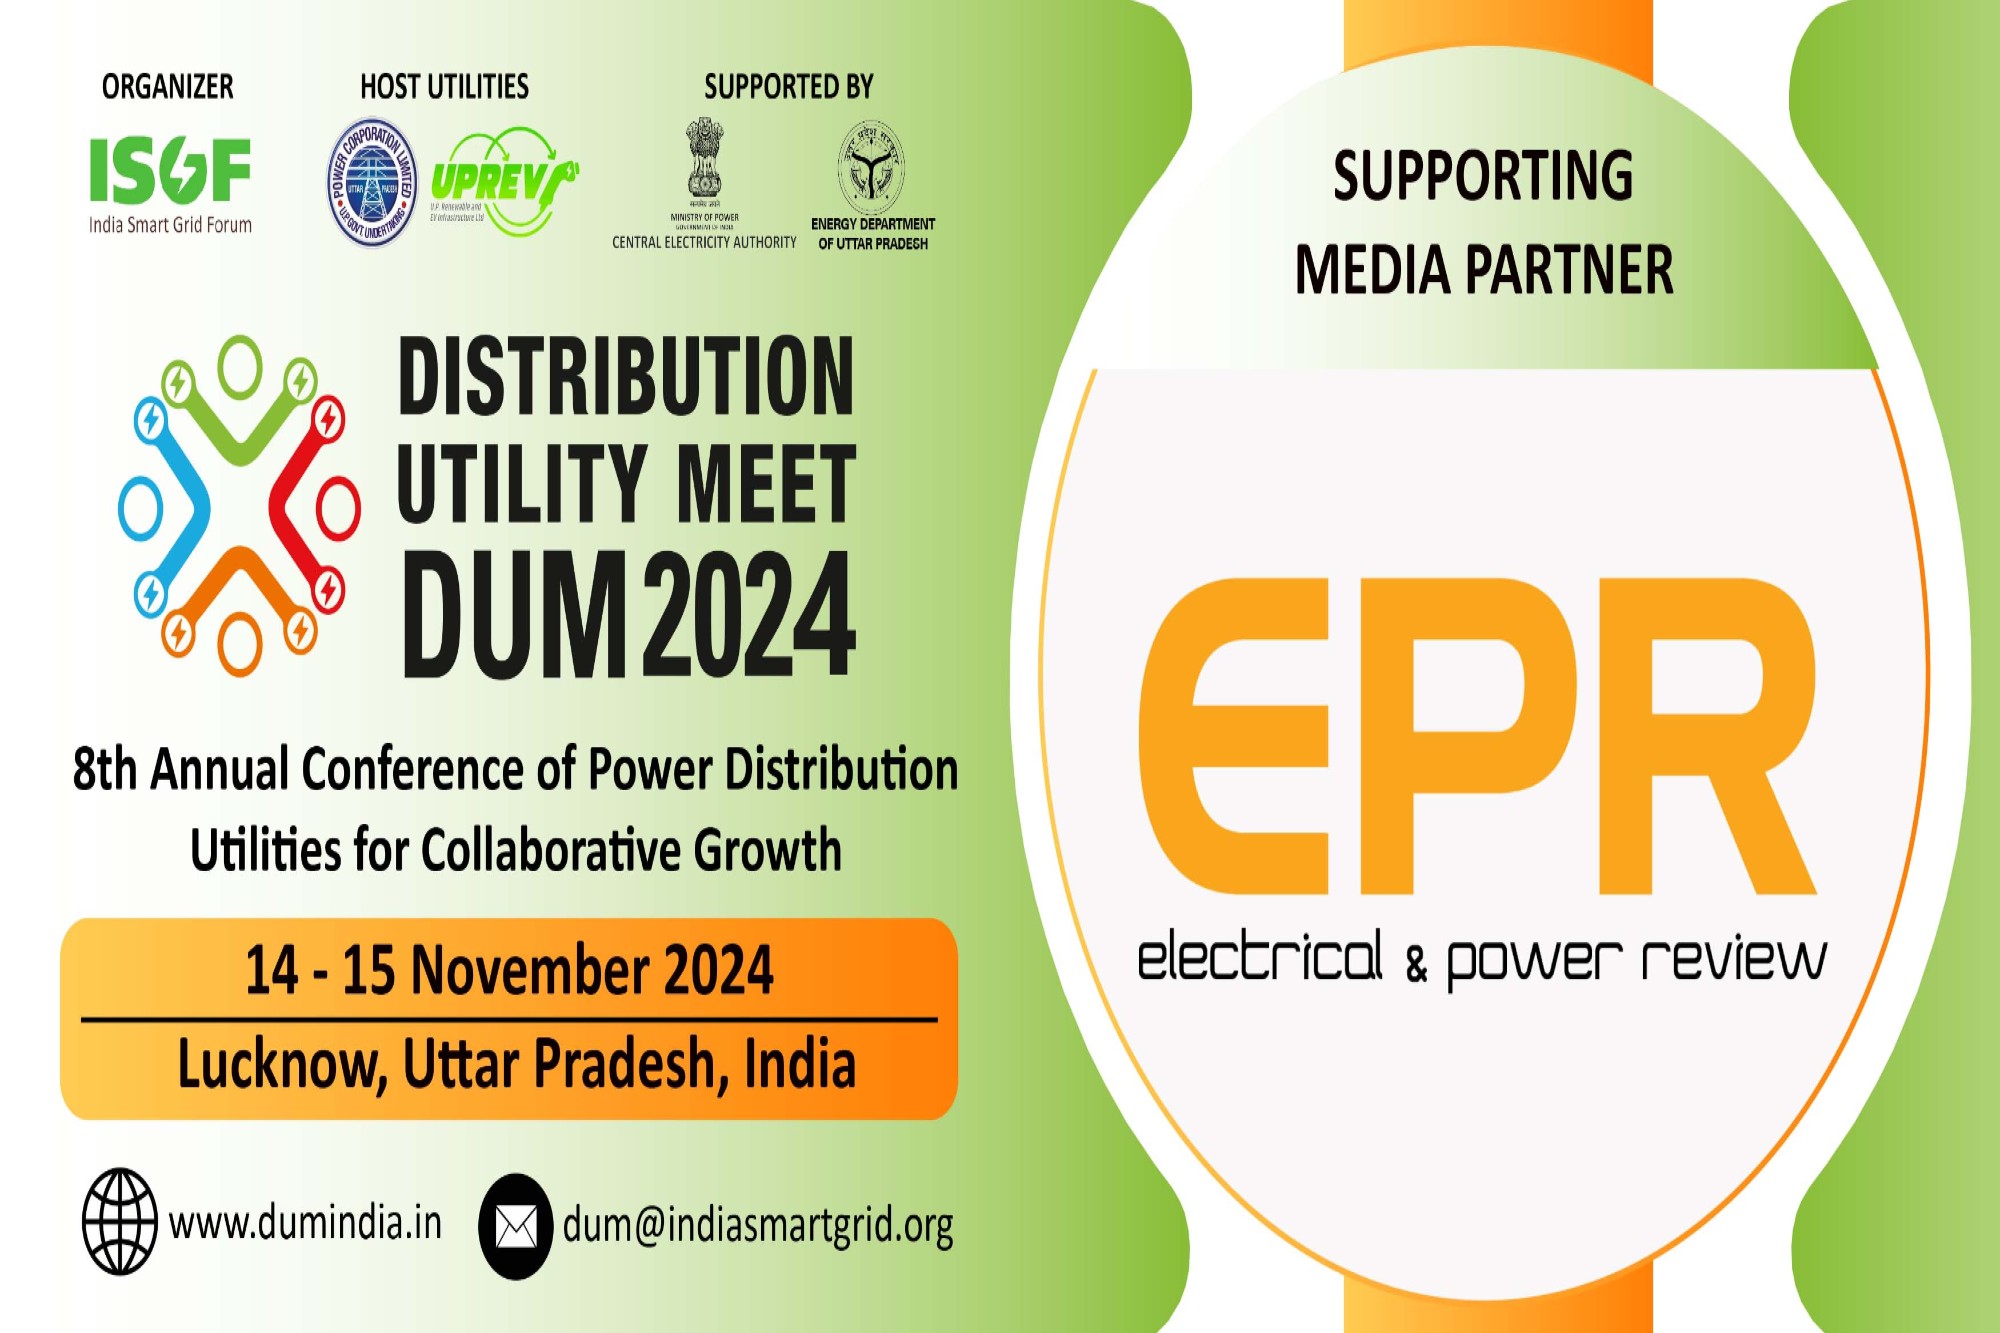 Distribution Utility Meet 2024 scheduled from November 14–15 in Lucknow